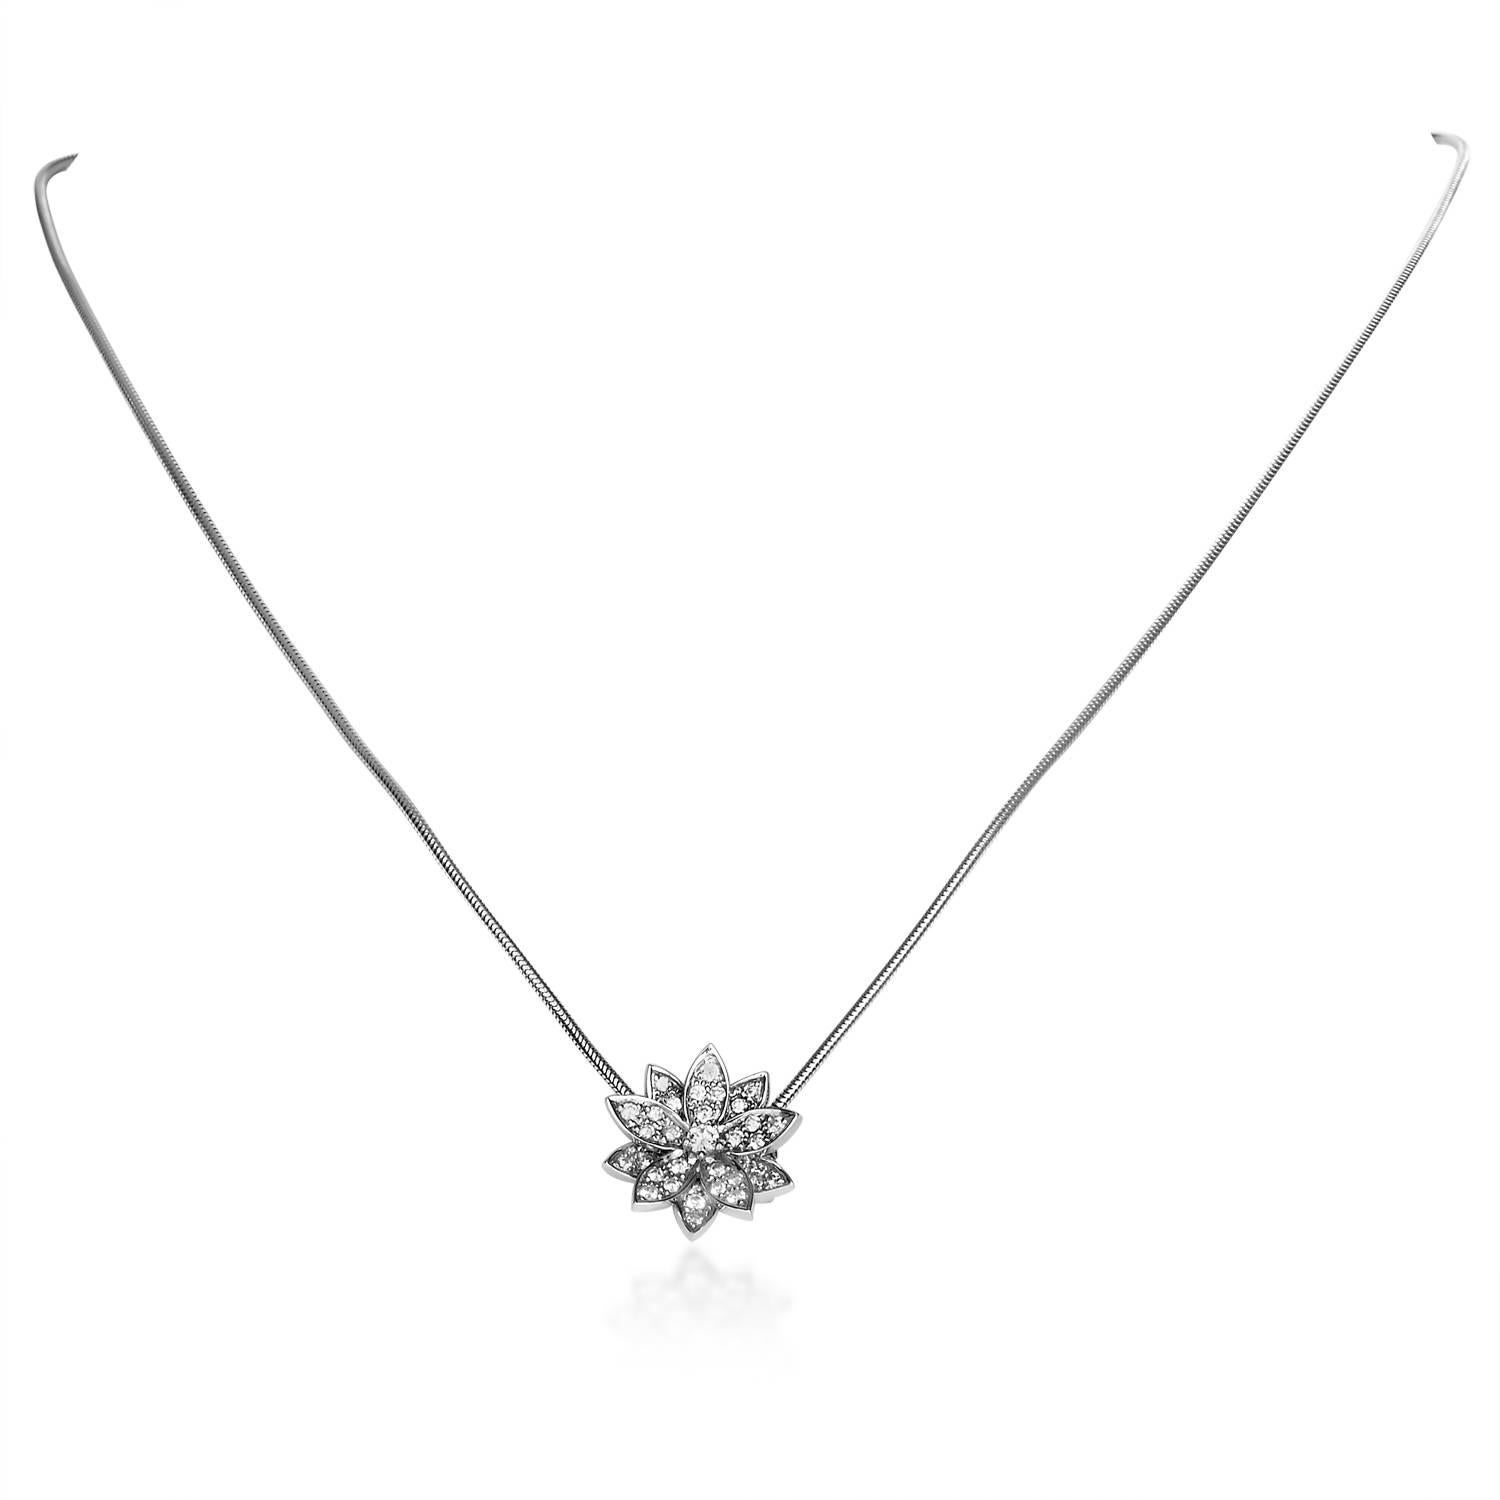 A scintillating and mesmerizing sight, the fascinating pendant of this elegant necklace from Van Cleef & Arpels epitomizes tasteful prestige, placing a majestic arrangement of glistening diamonds upon bright shimmering 18K white gold in the form of